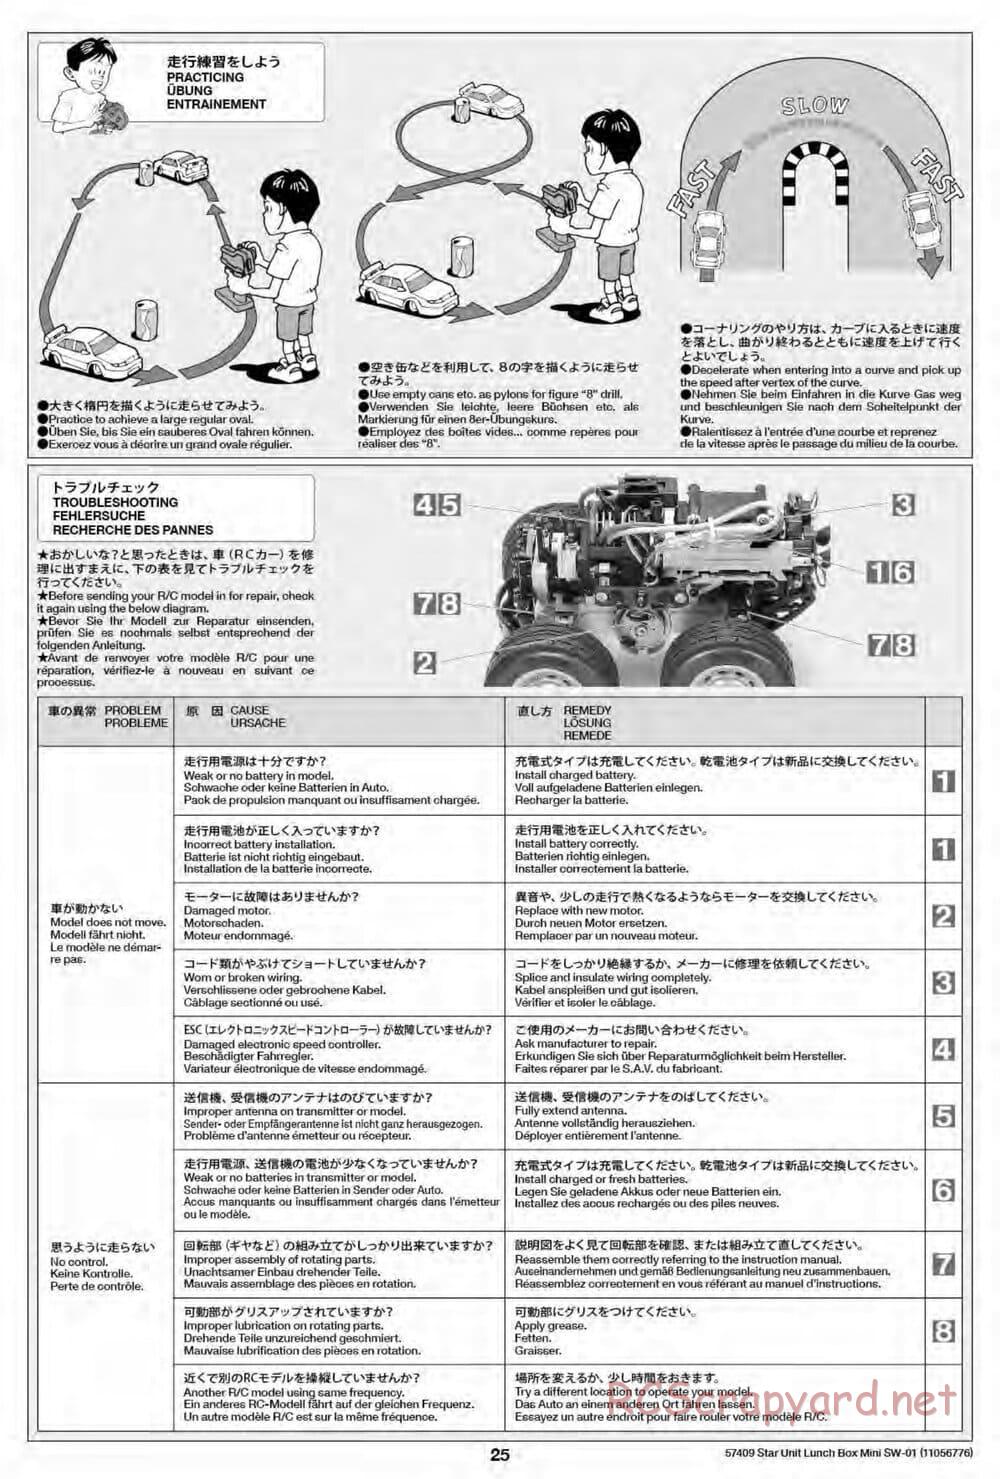 Tamiya - Lunch Box Mini - SW-01 Chassis - Manual - Page 25